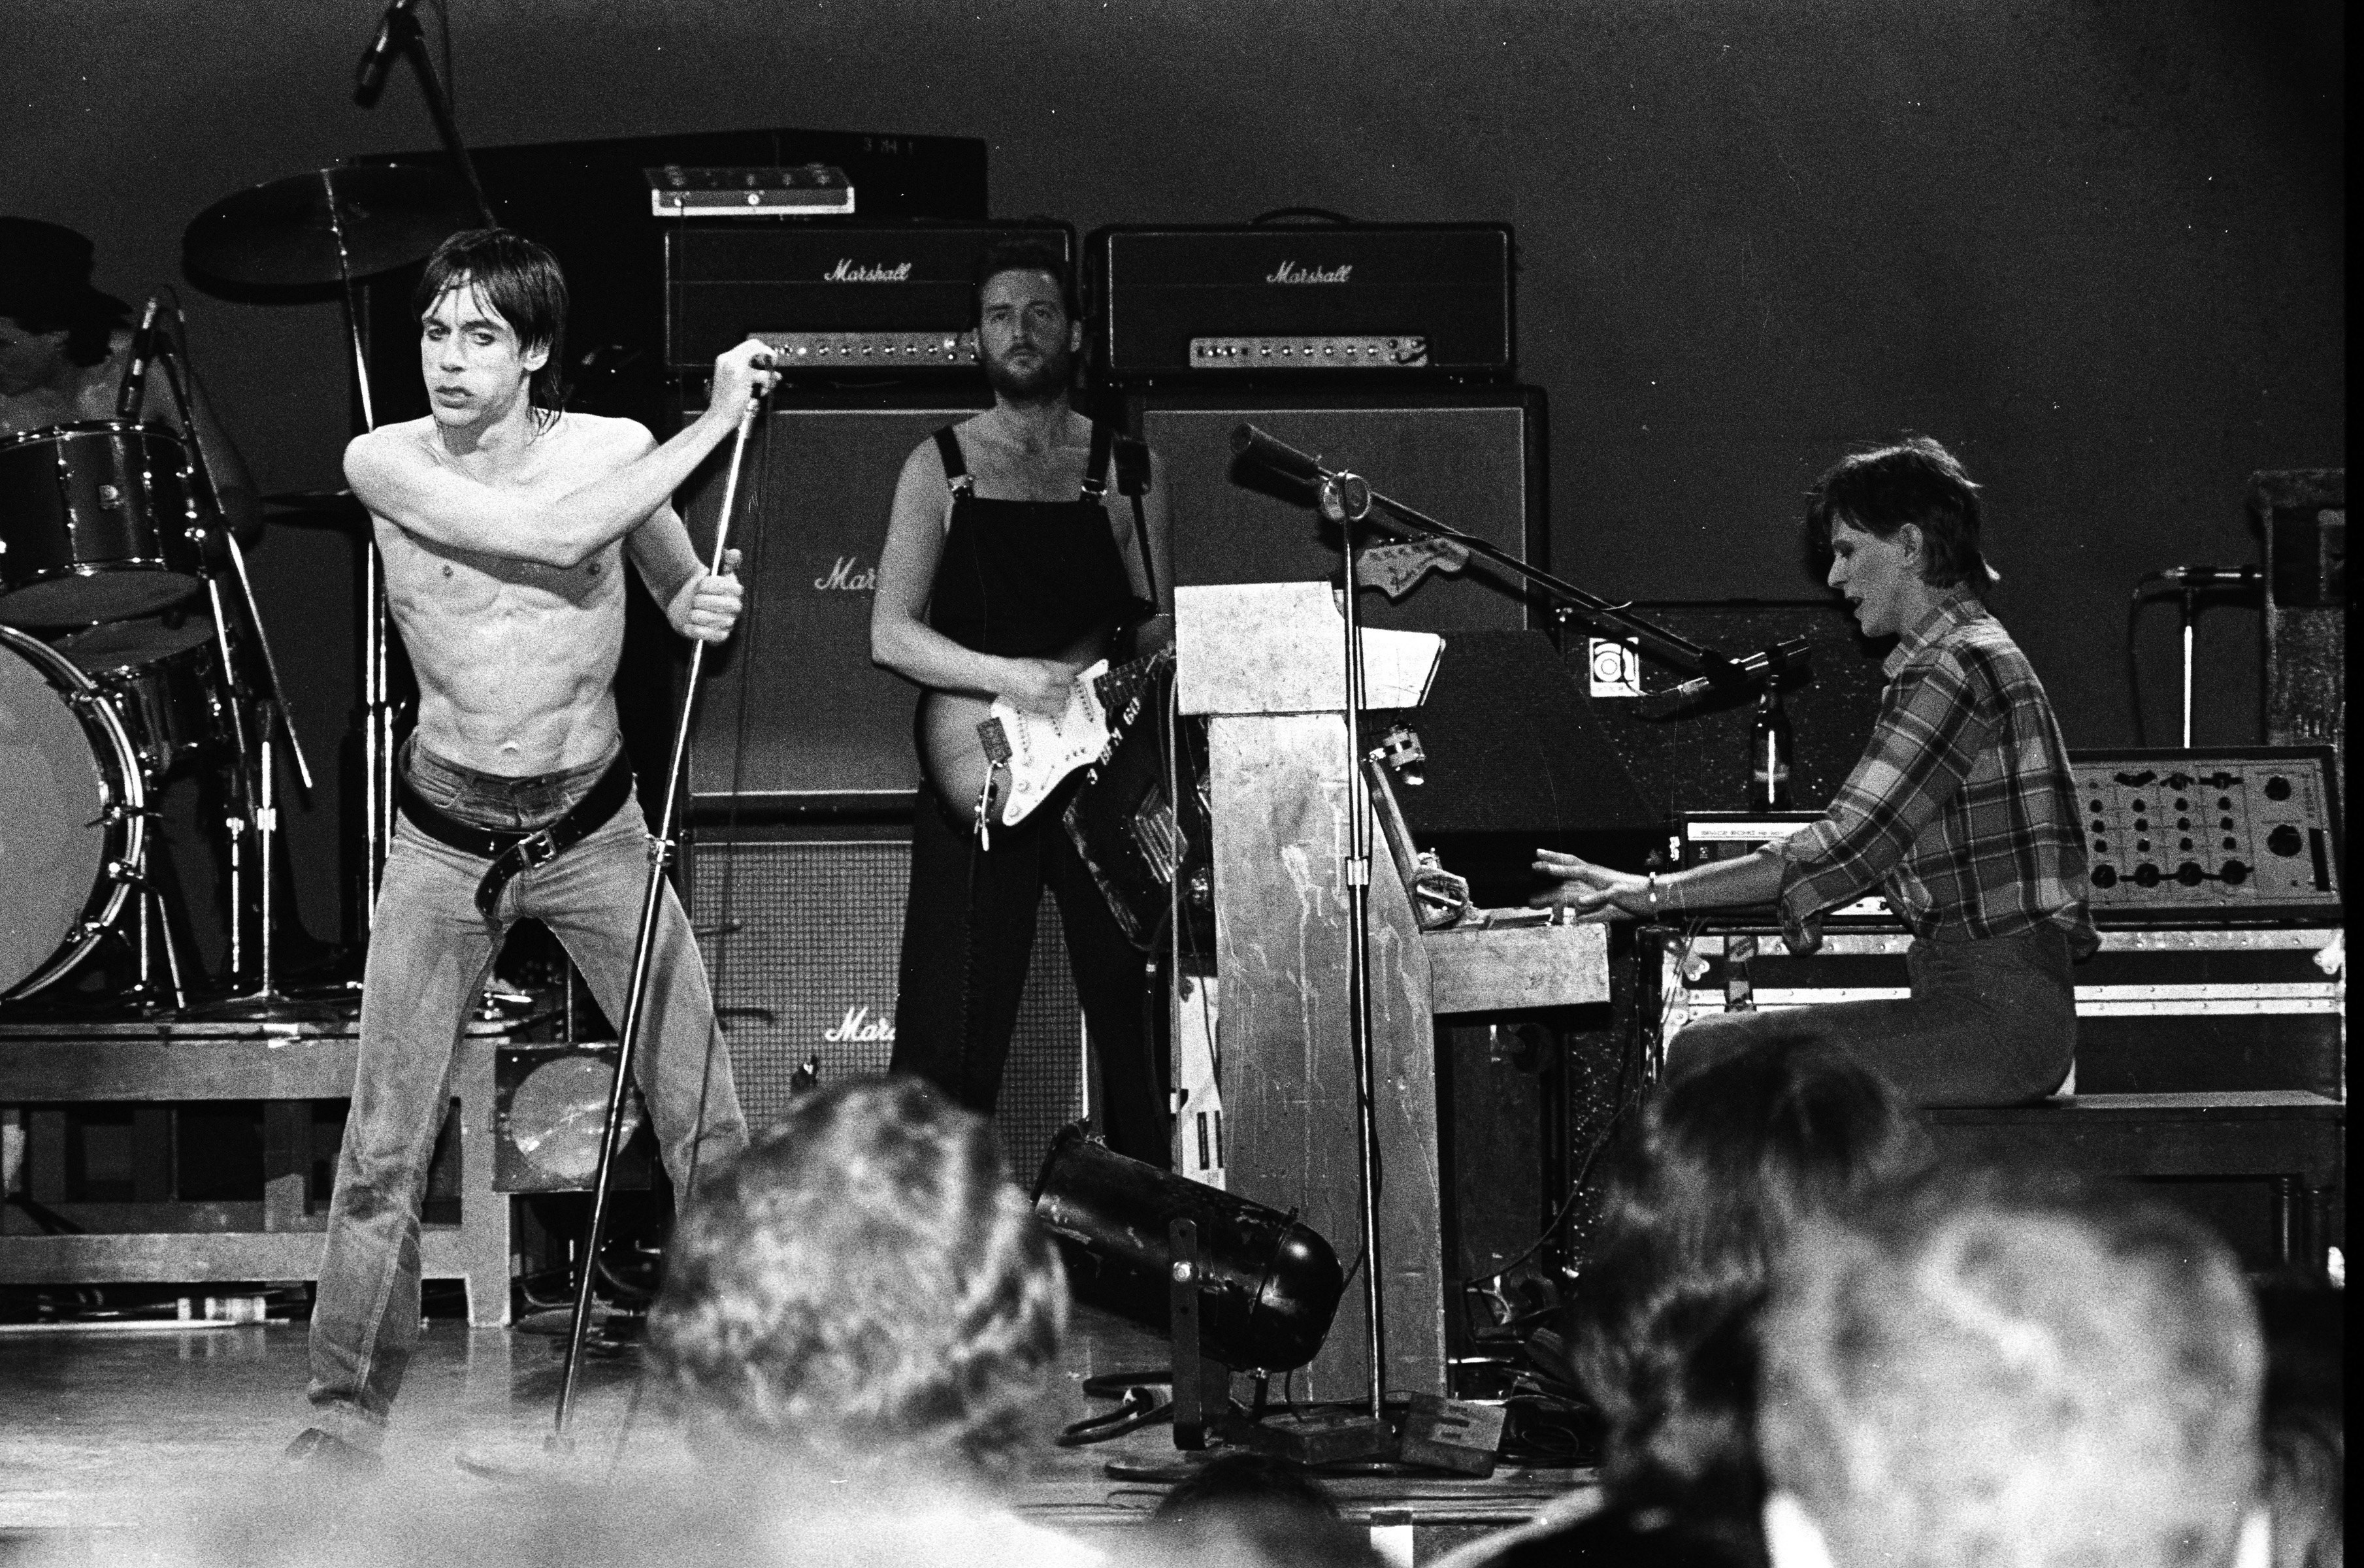 SAN FRANCISCO - 1978:  L-R Iggy Pop, Ricky Gardiner and David Bowie perform live in 1978 in San Francisco, California. (Photo by Richard McCaffrey/Michael Ochs Archive/Getty Images)  (Foto: Getty Images)